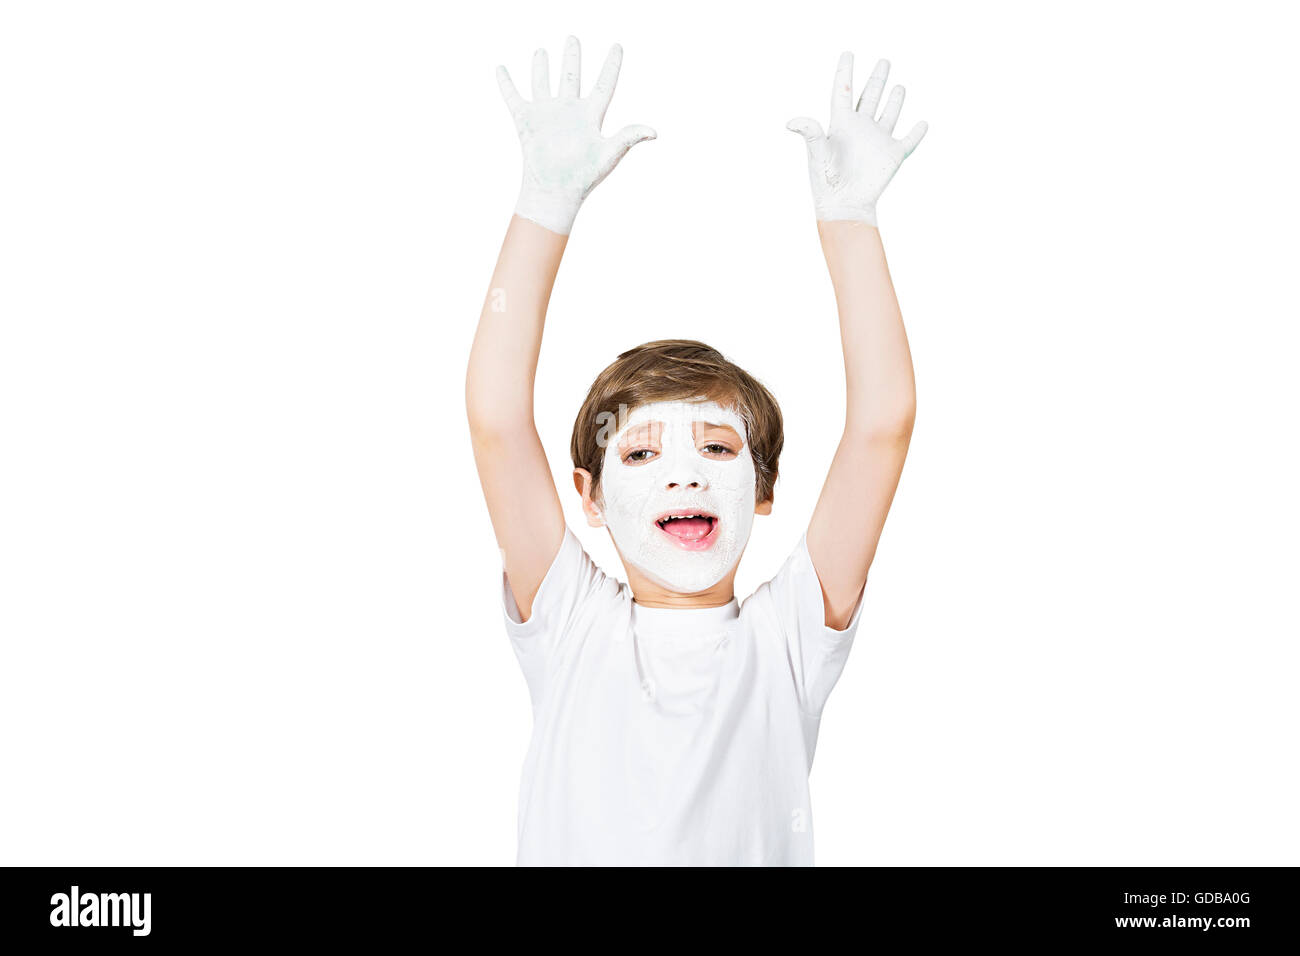 1 indian Kid boy face paint Standing shouting Stock Photo